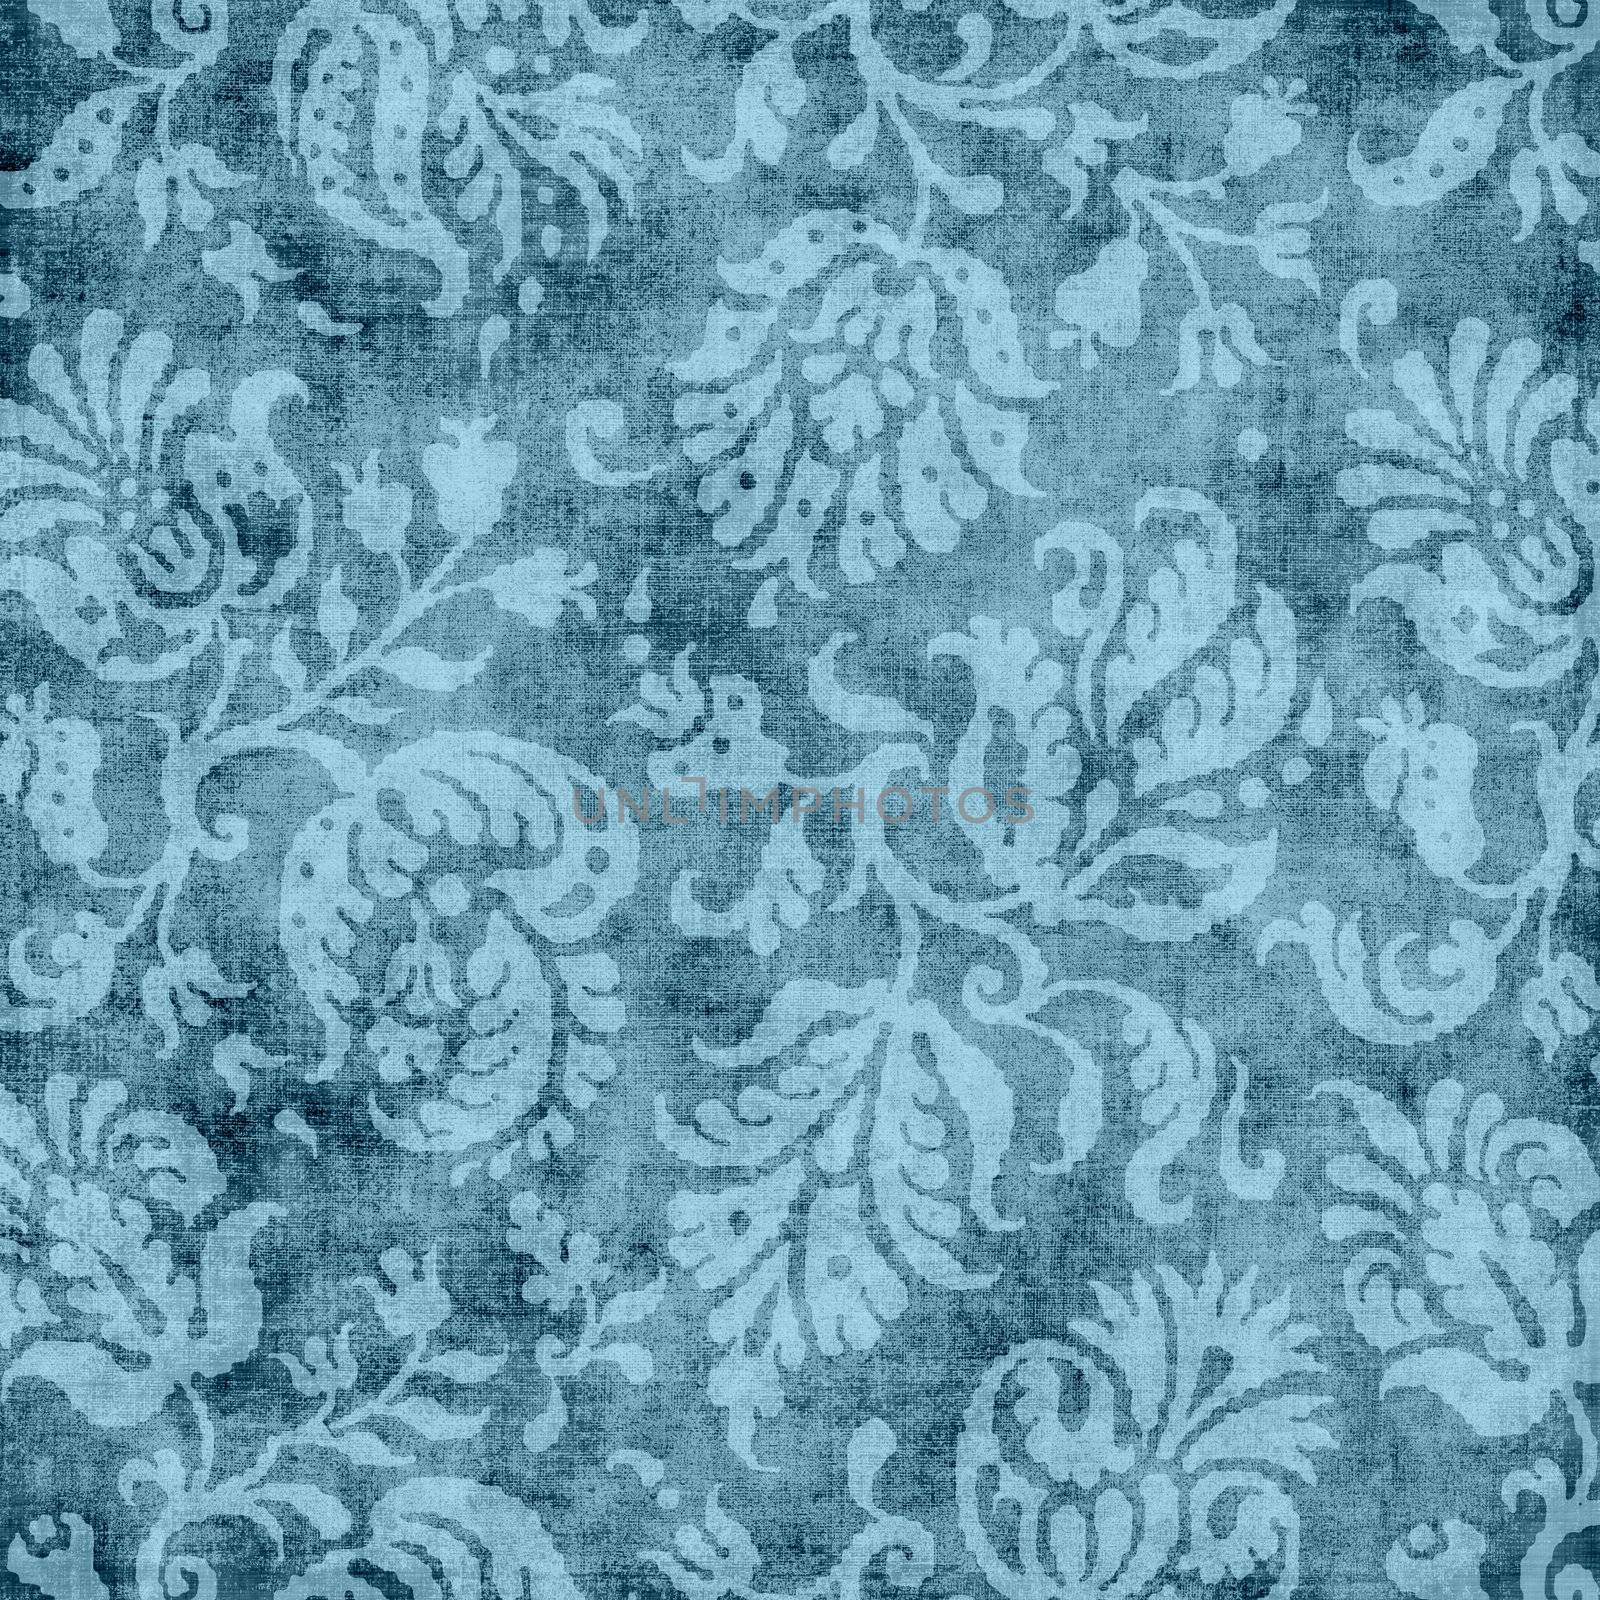 Worn blue floral tapestry pattern